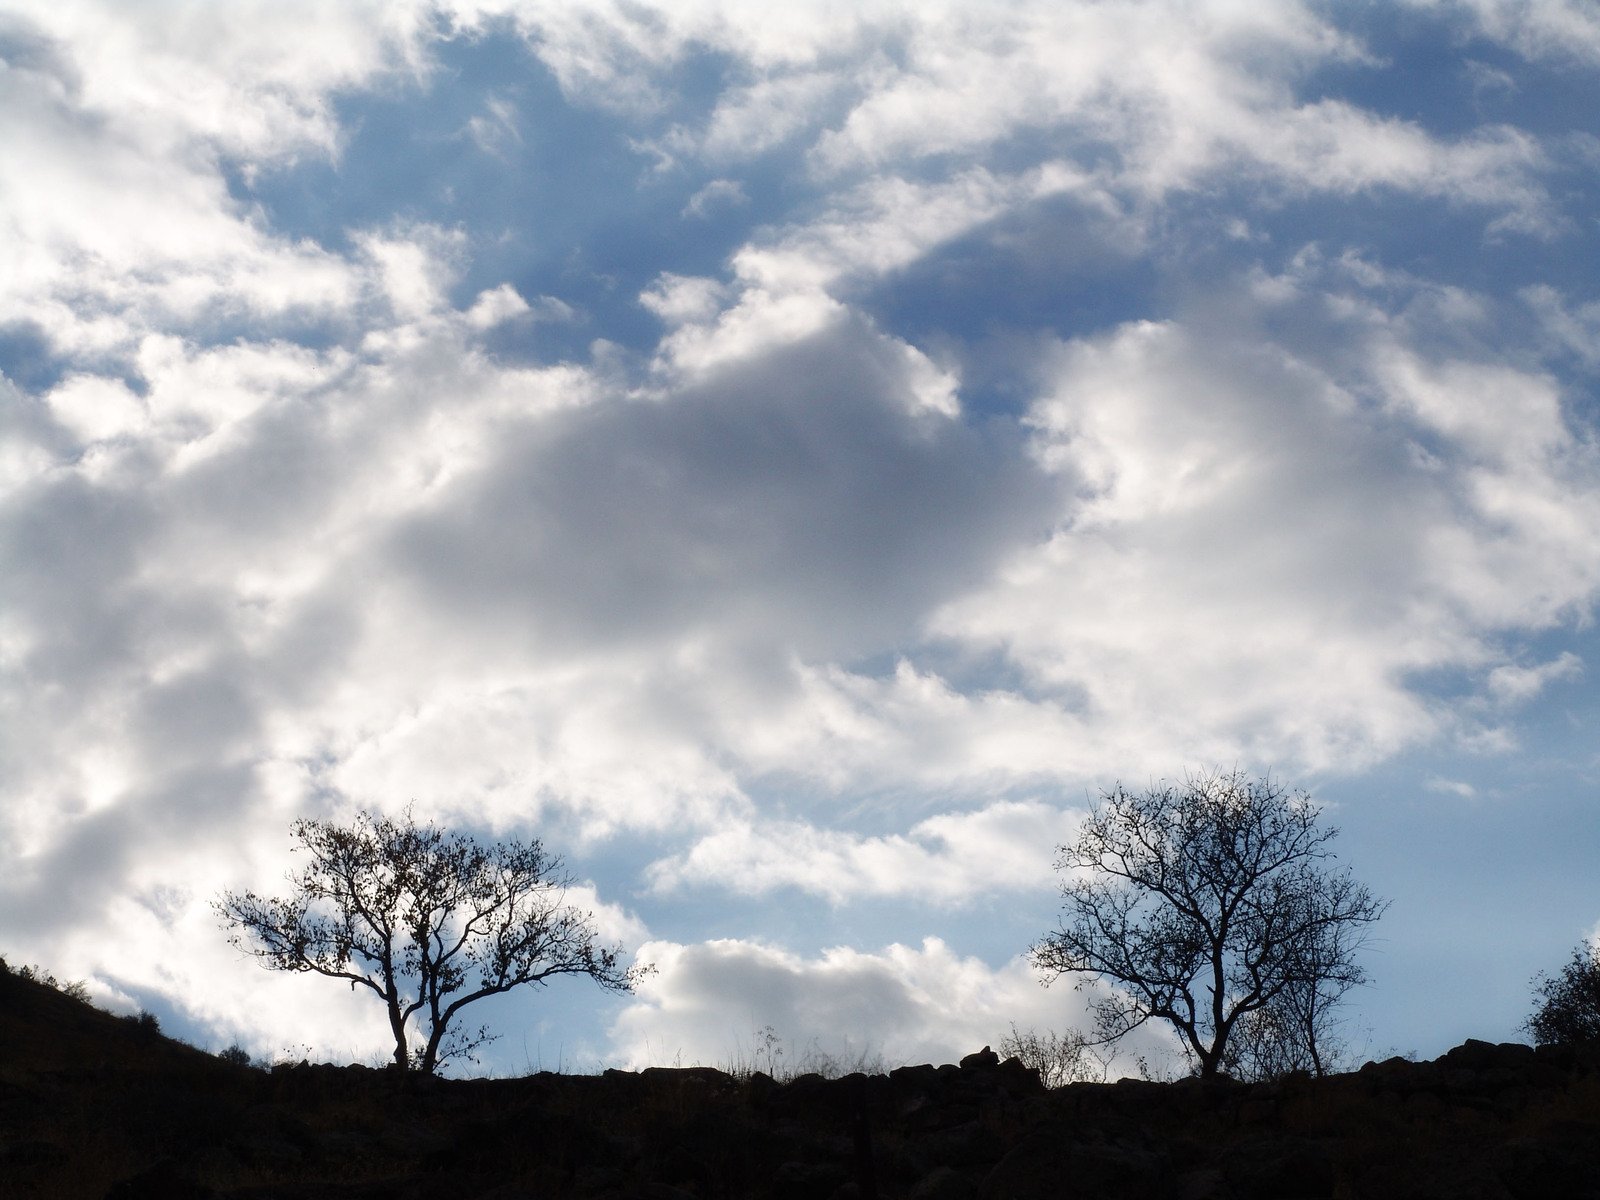 some trees sitting on a hill near the clouds